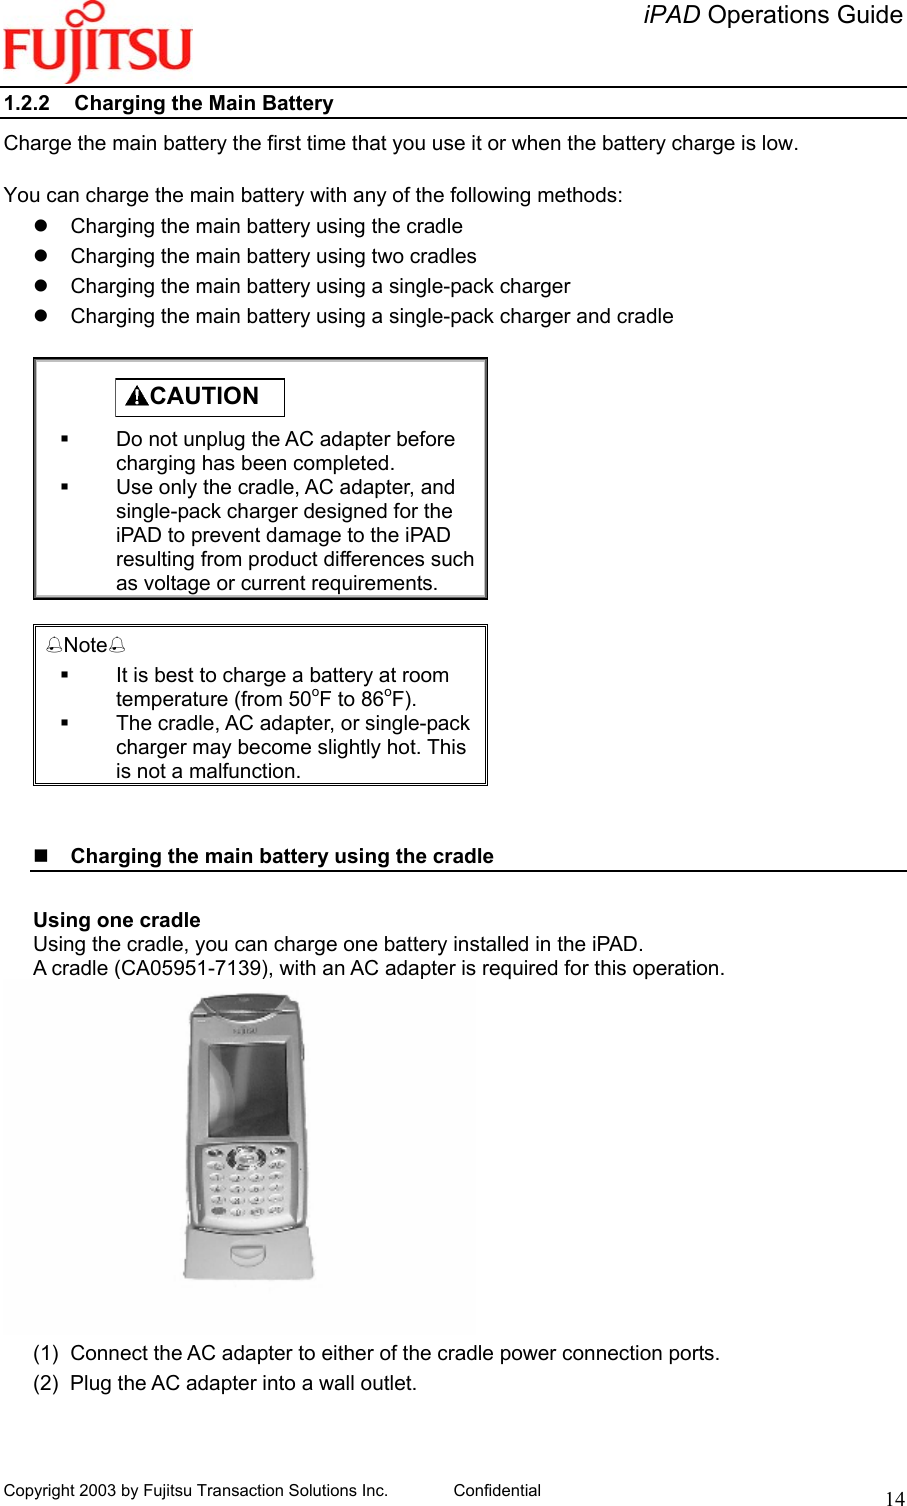   iPAD Operations Guide   Copyright 2003 by Fujitsu Transaction Solutions Inc. Confidential  141.2.2  Charging the Main Battery Charge the main battery the first time that you use it or when the battery charge is low.  You can charge the main battery with any of the following methods:   Charging the main battery using the cradle   Charging the main battery using two cradles   Charging the main battery using a single-pack charger   Charging the main battery using a single-pack charger and cradle           CAUTION    Do not unplug the AC adapter before charging has been completed.   Use only the cradle, AC adapter, and single-pack charger designed for the iPAD to prevent damage to the iPAD resulting from product differences such as voltage or current requirements.  Note   It is best to charge a battery at room temperature (from 50oF to 86oF).   The cradle, AC adapter, or single-pack charger may become slightly hot. This is not a malfunction.     Charging the main battery using the cradle   Using one cradle Using the cradle, you can charge one battery installed in the iPAD. A cradle (CA05951-7139), with an AC adapter is required for this operation.  (1)  Connect the AC adapter to either of the cradle power connection ports. (2)  Plug the AC adapter into a wall outlet. 